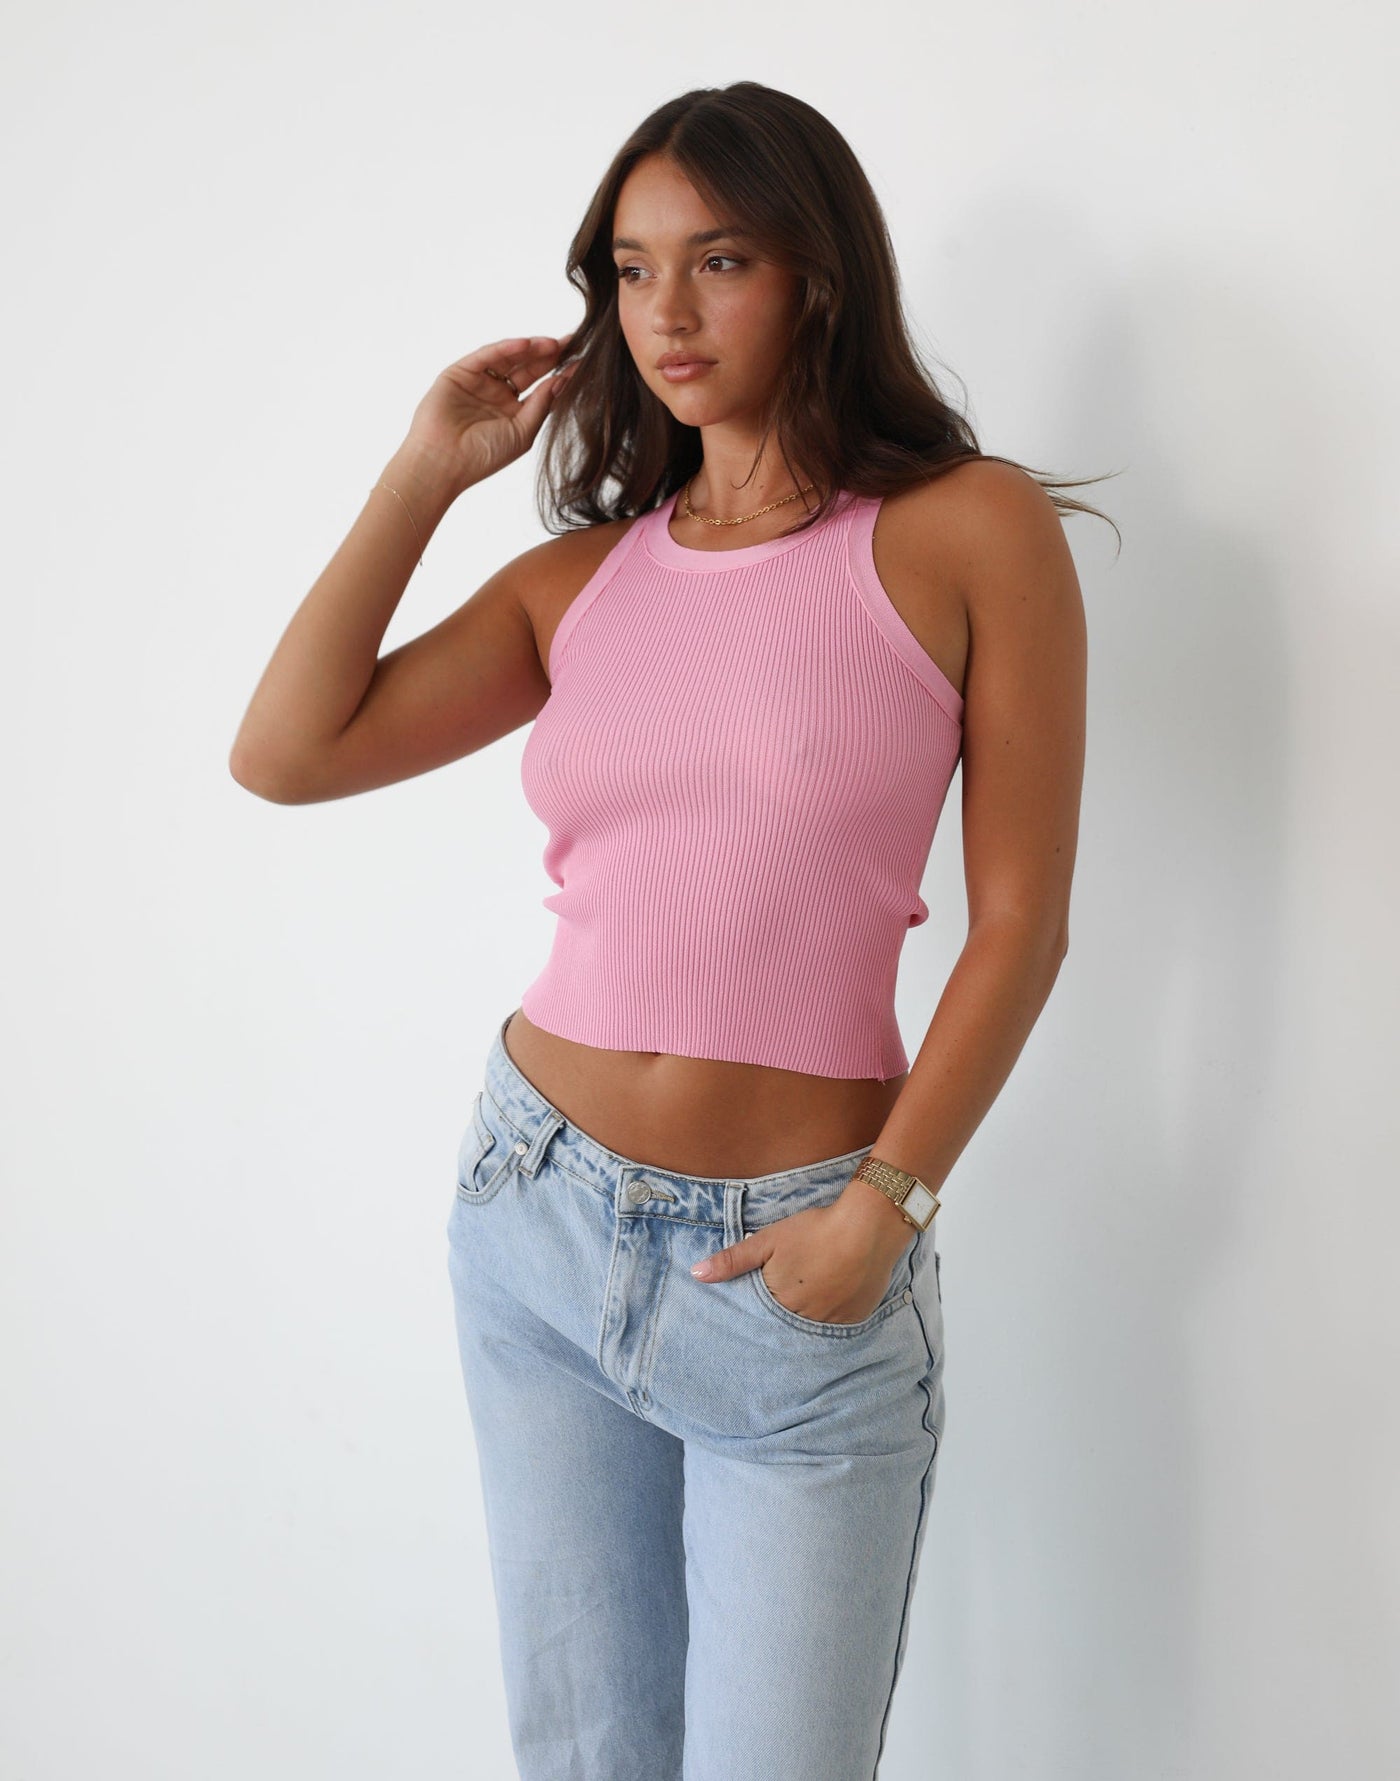 Cassidy Tank Top (Pink) | Ribbed Singlet Tank Top - Women's Top - Charcoal Clothing